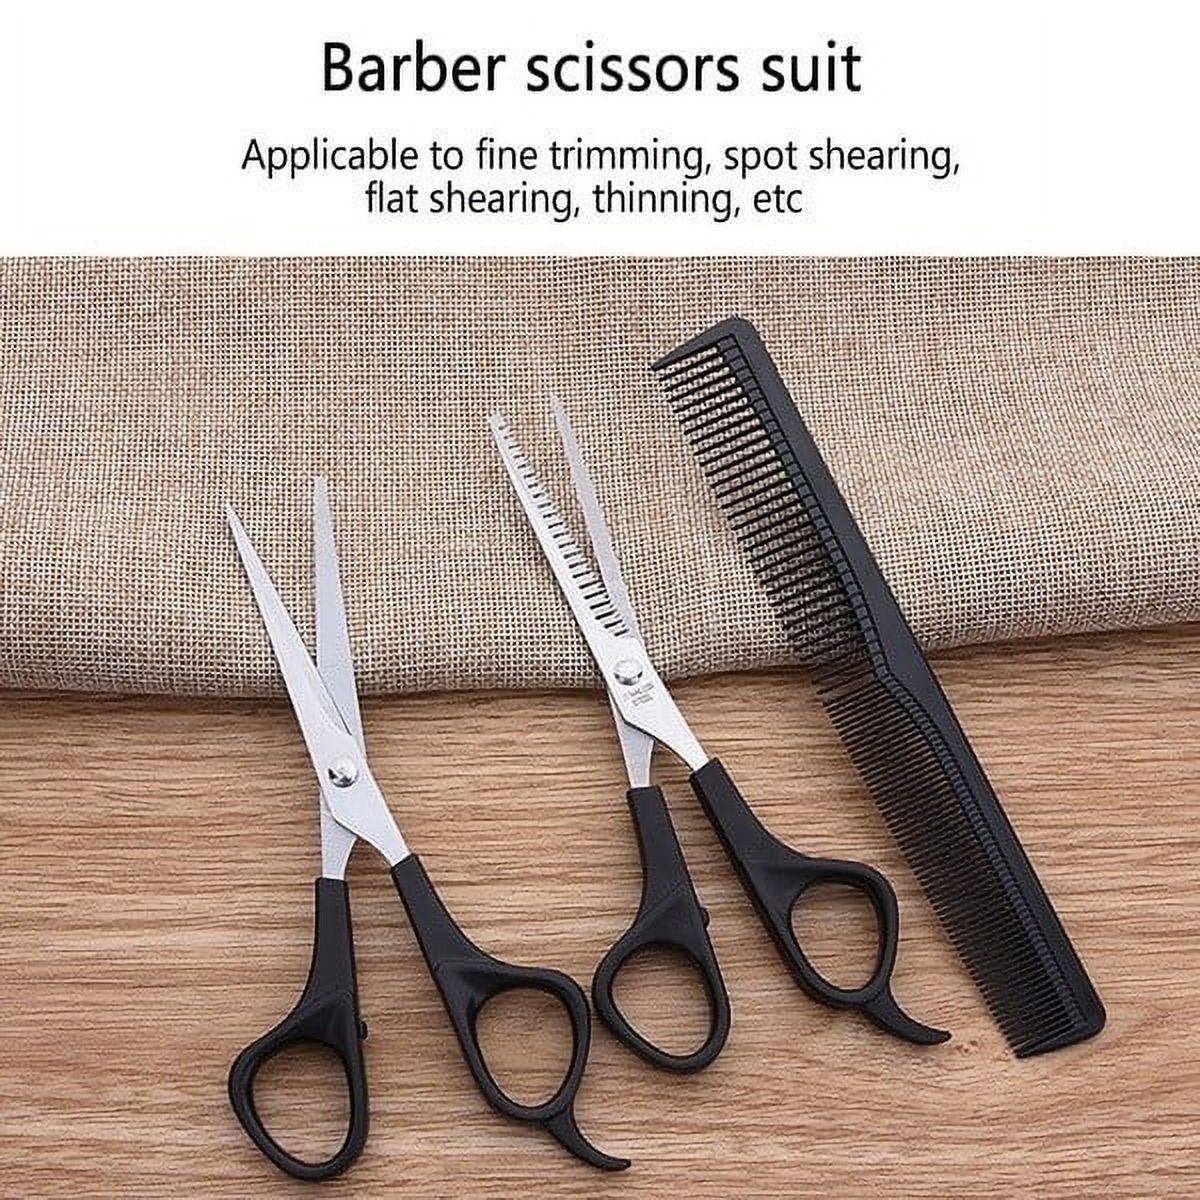 Willstar 3/9pcs Hair Cutting Scissors Set Professional Stainless Steel Barber Thinning Scissors for Barber Salon and Home - image 14 of 16